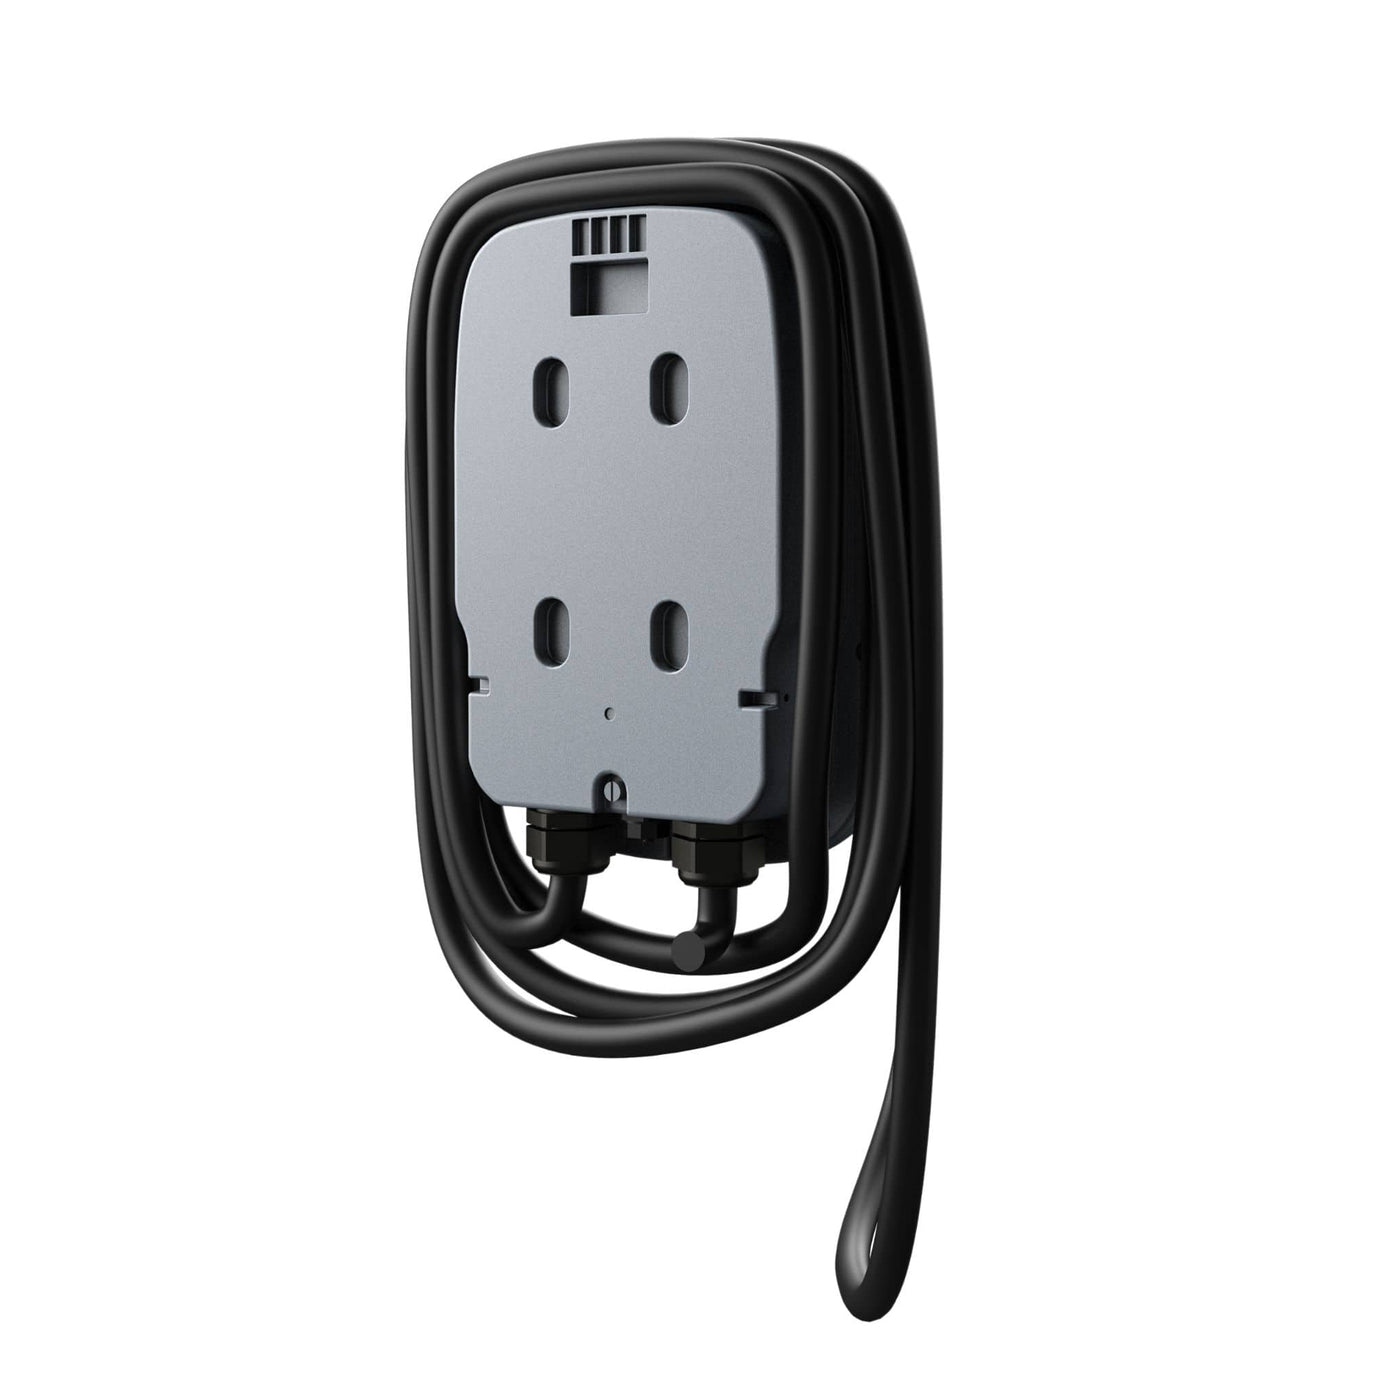 Hwisel Plug & Charge 80A Residential Fast EV (Electric Vehicle) Battery Charger Level 2, Smart Charging Station 240V, EVSE 19.2kW Image Size 2040x2040 3